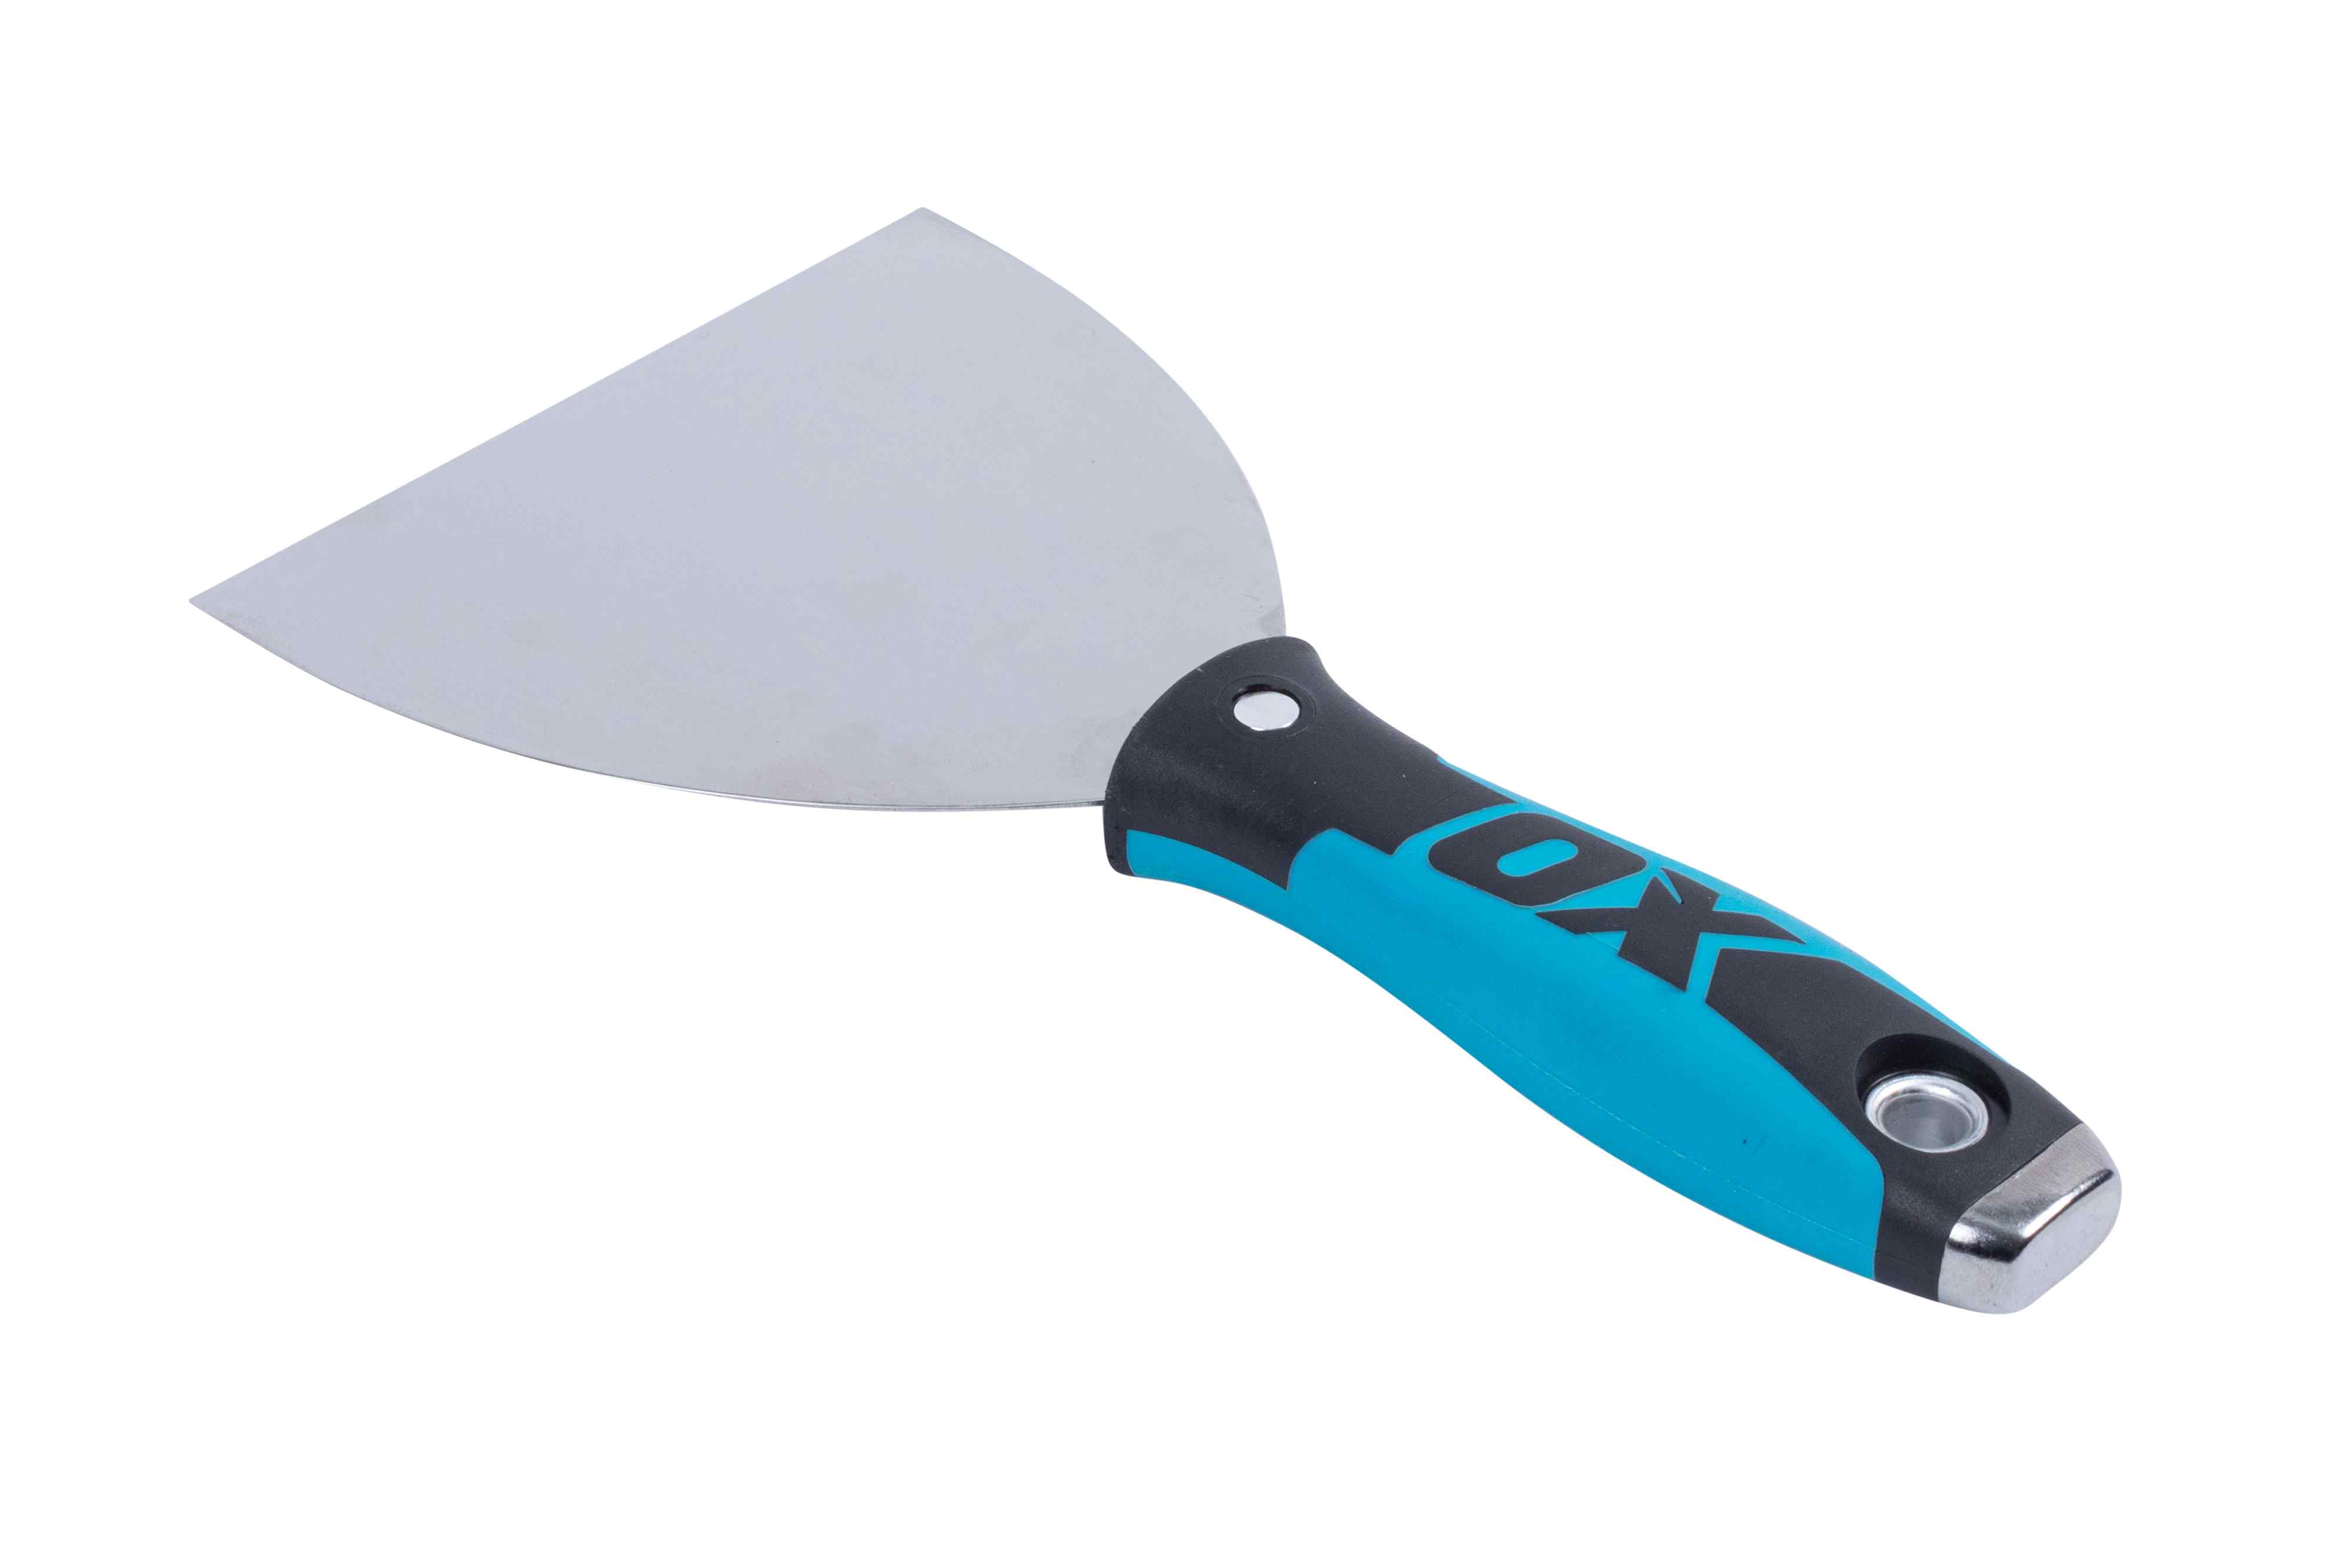 OX Pro Joint Knife - 127mm